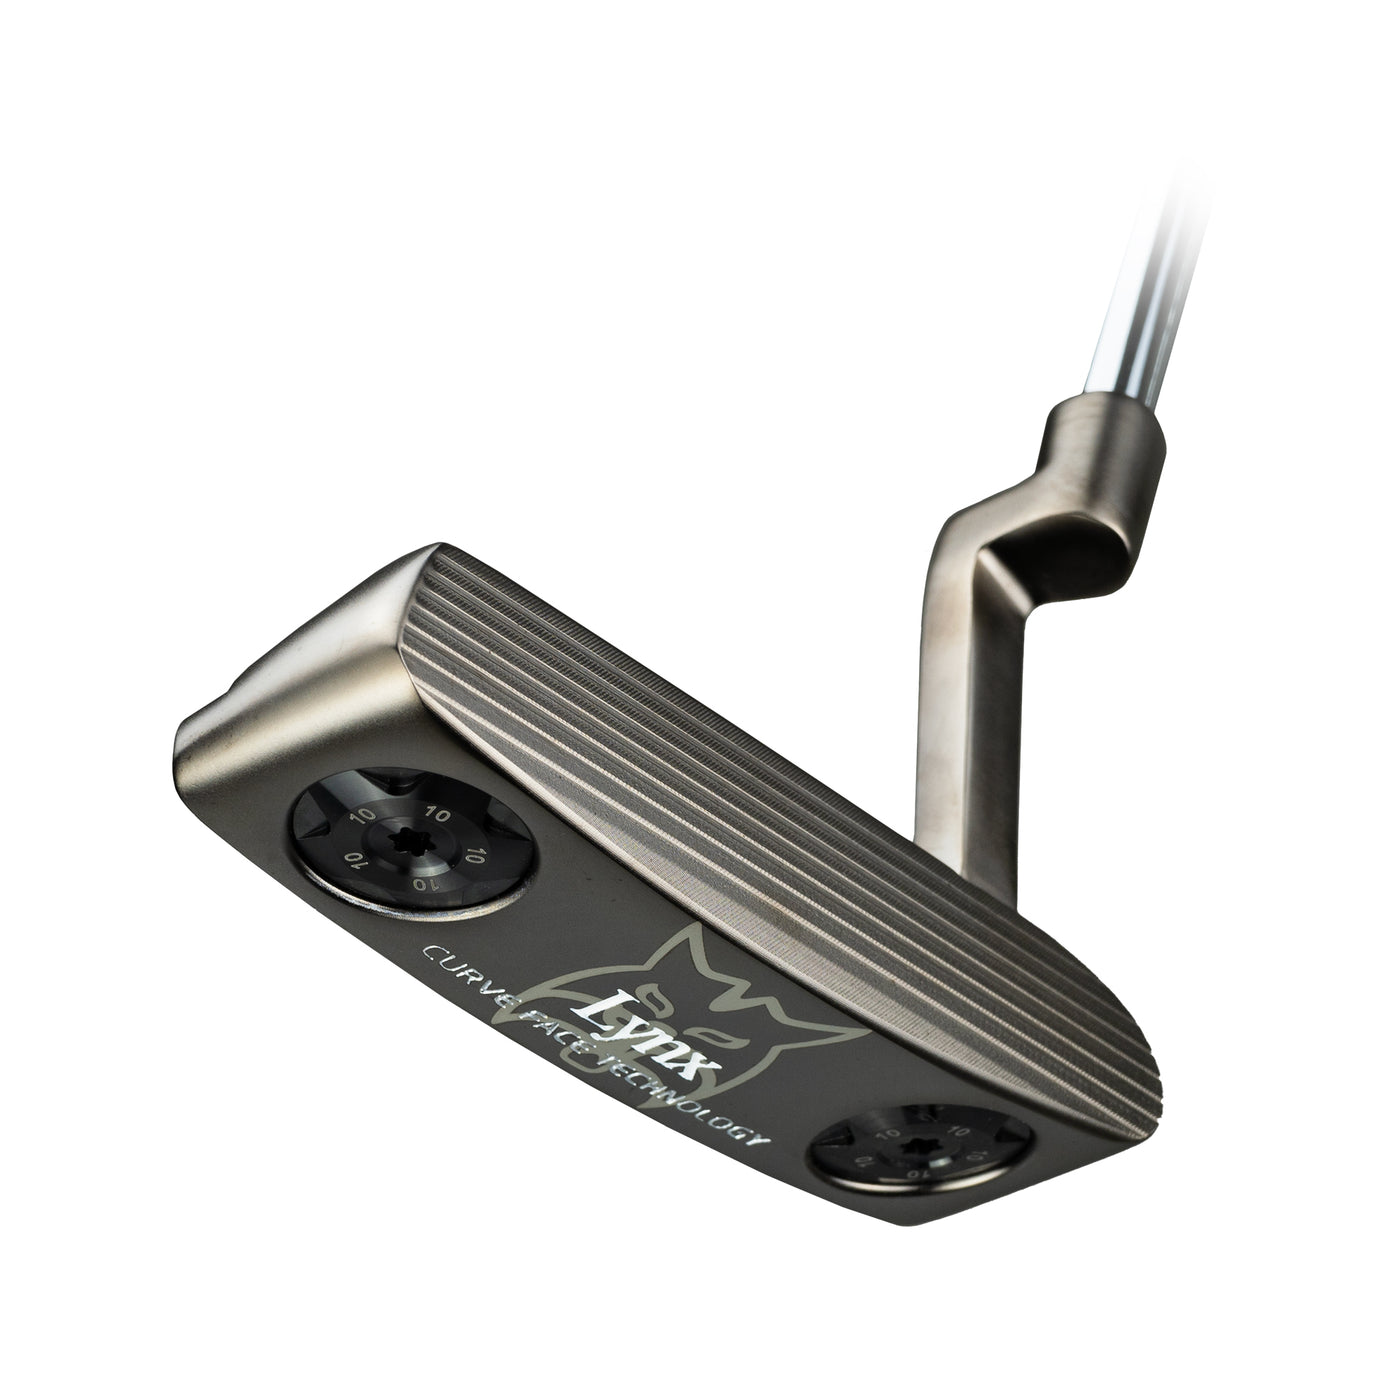 Prowler® Putters